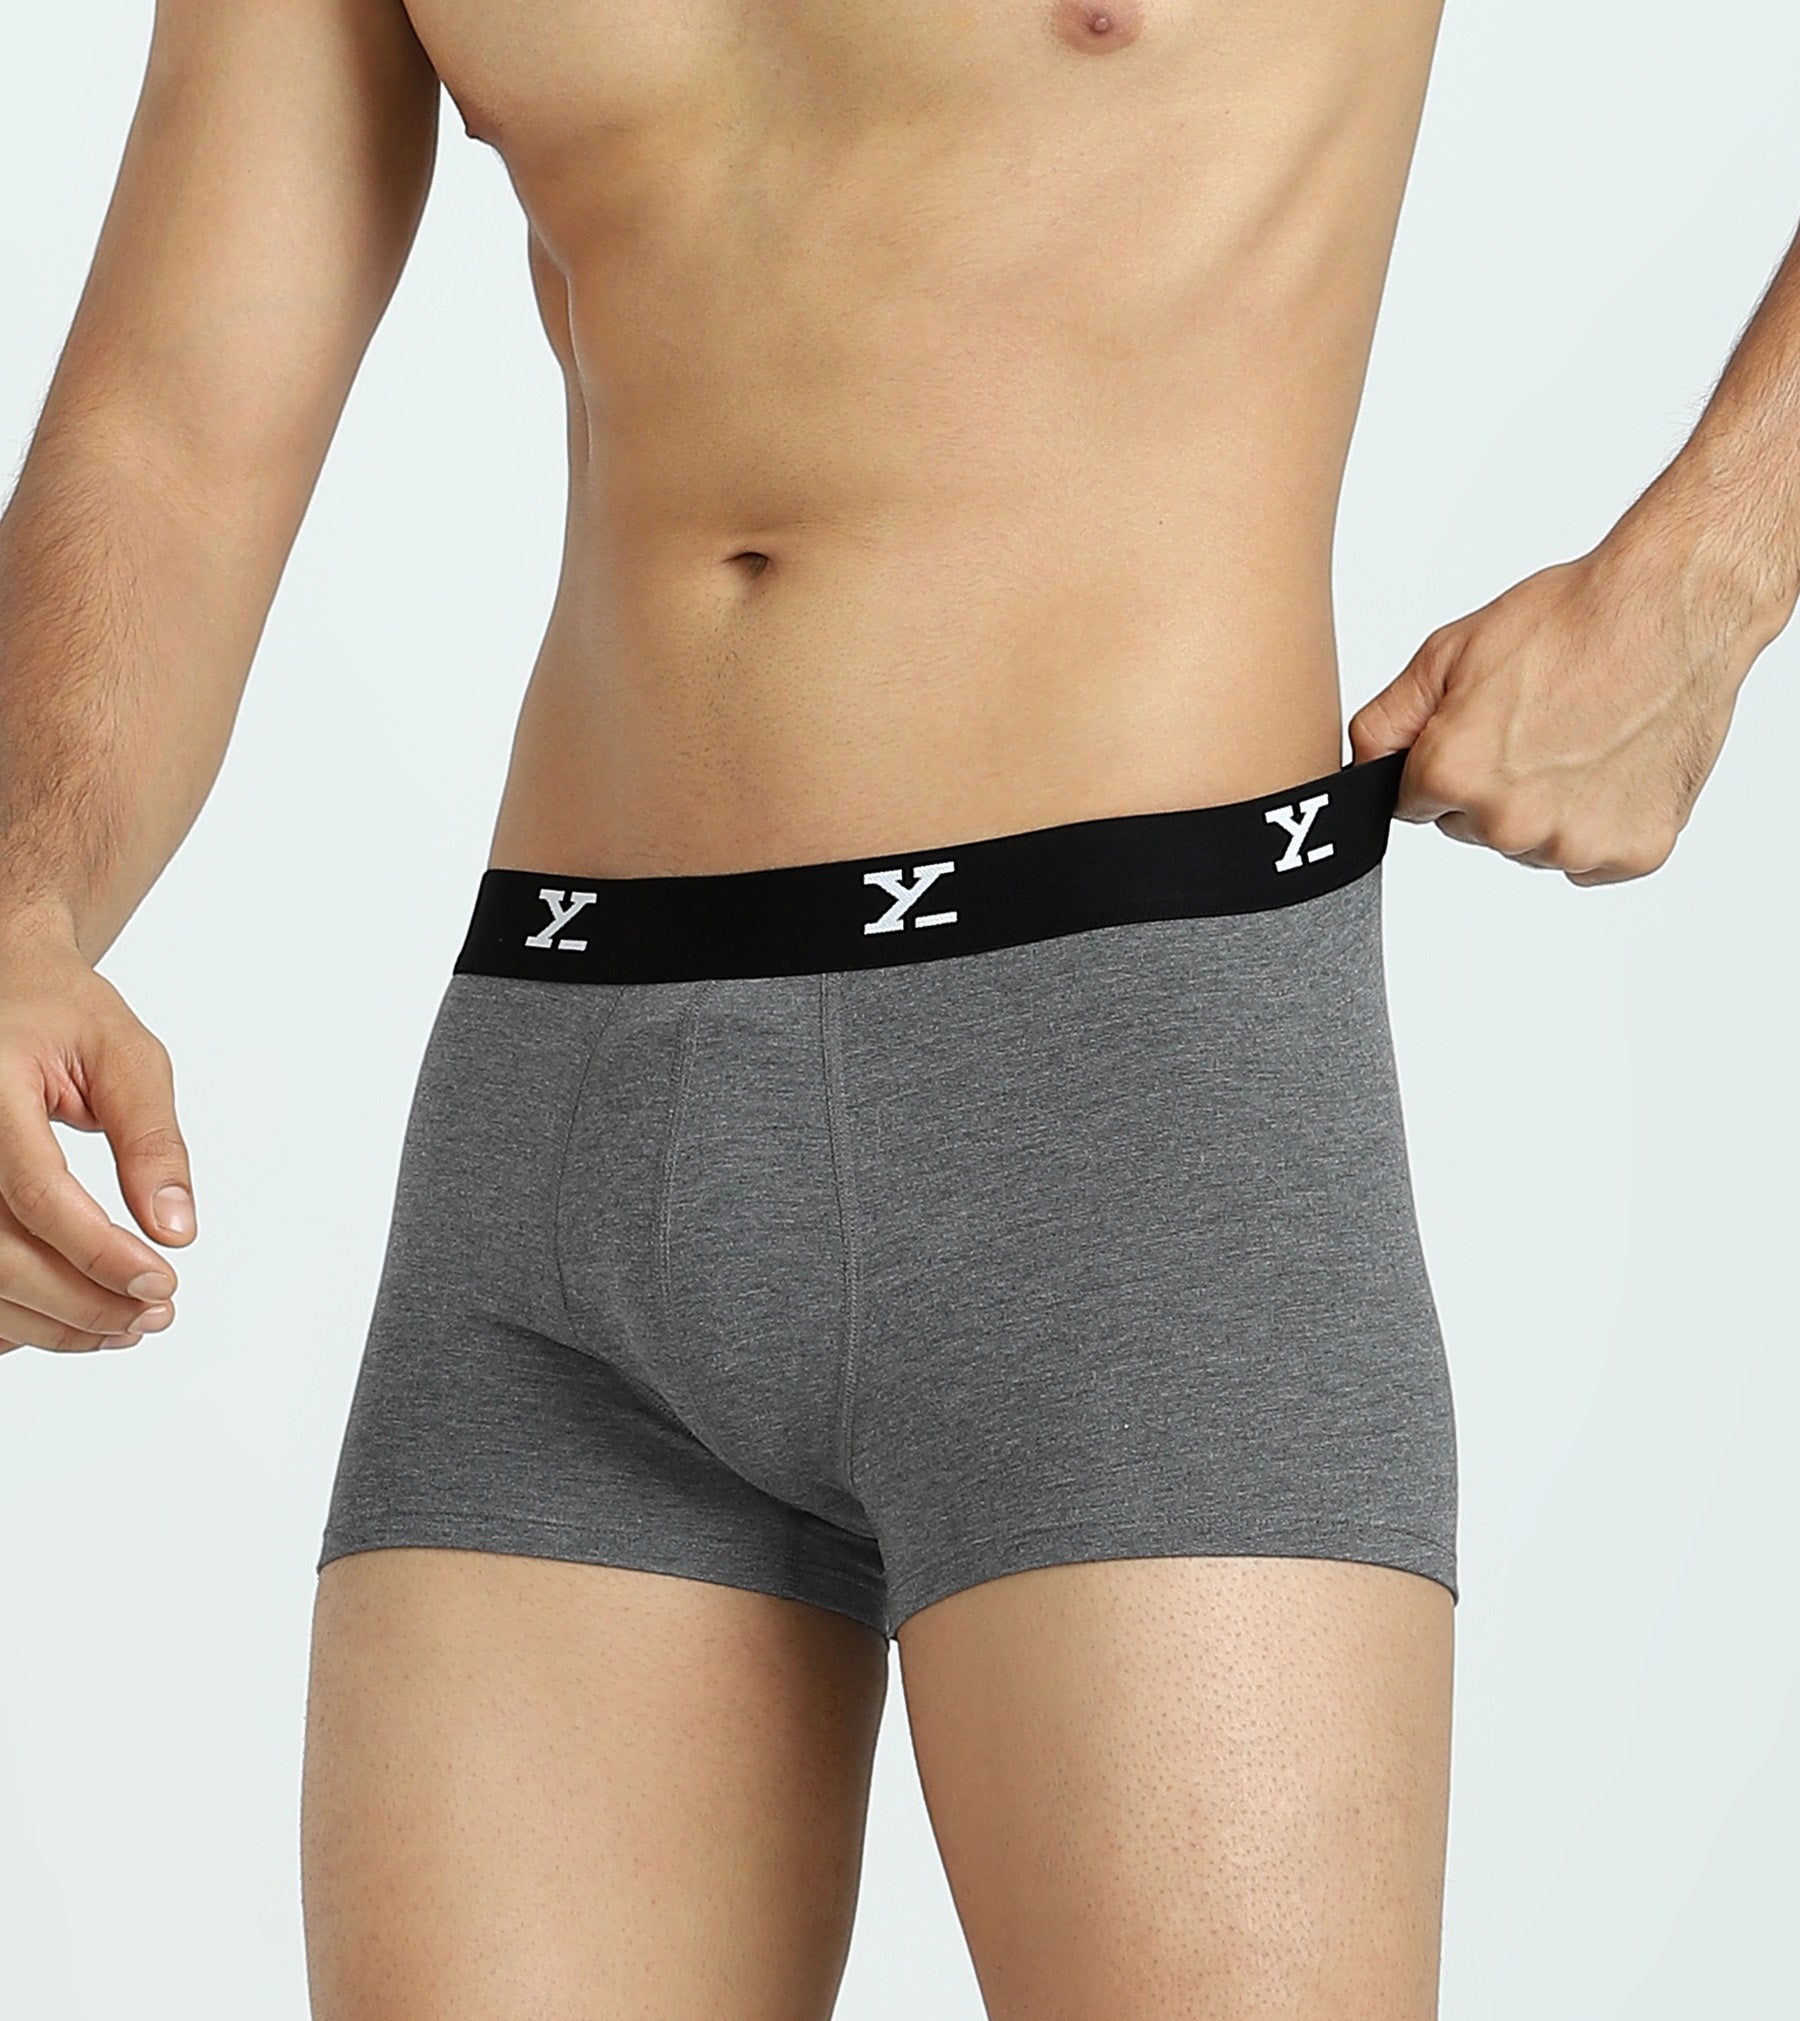 Ace Medley Modal Trunks For Men Icy Grey -  XYXX Mens Apparels